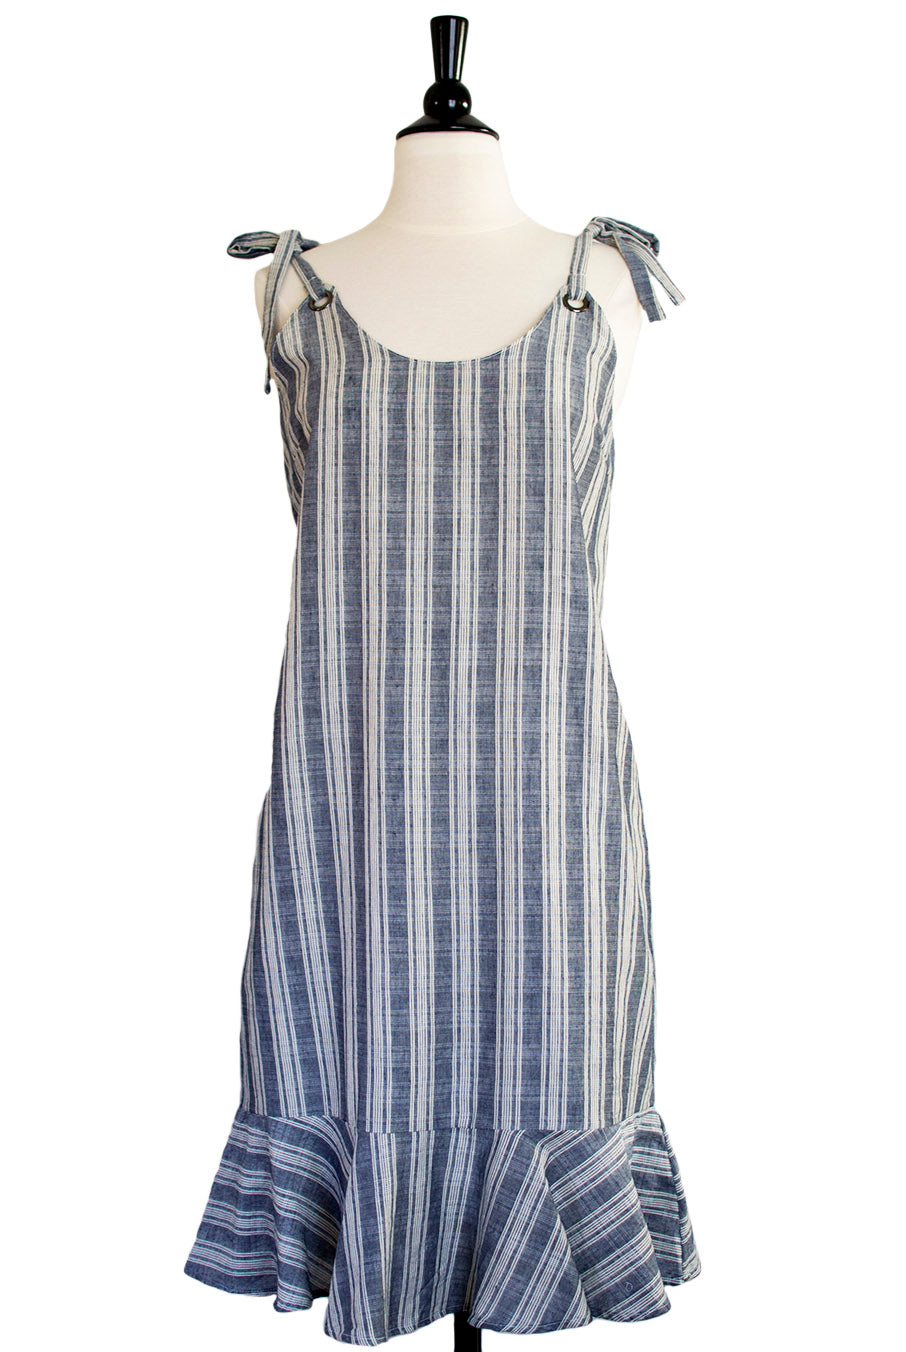 blue and white vertical striped dress